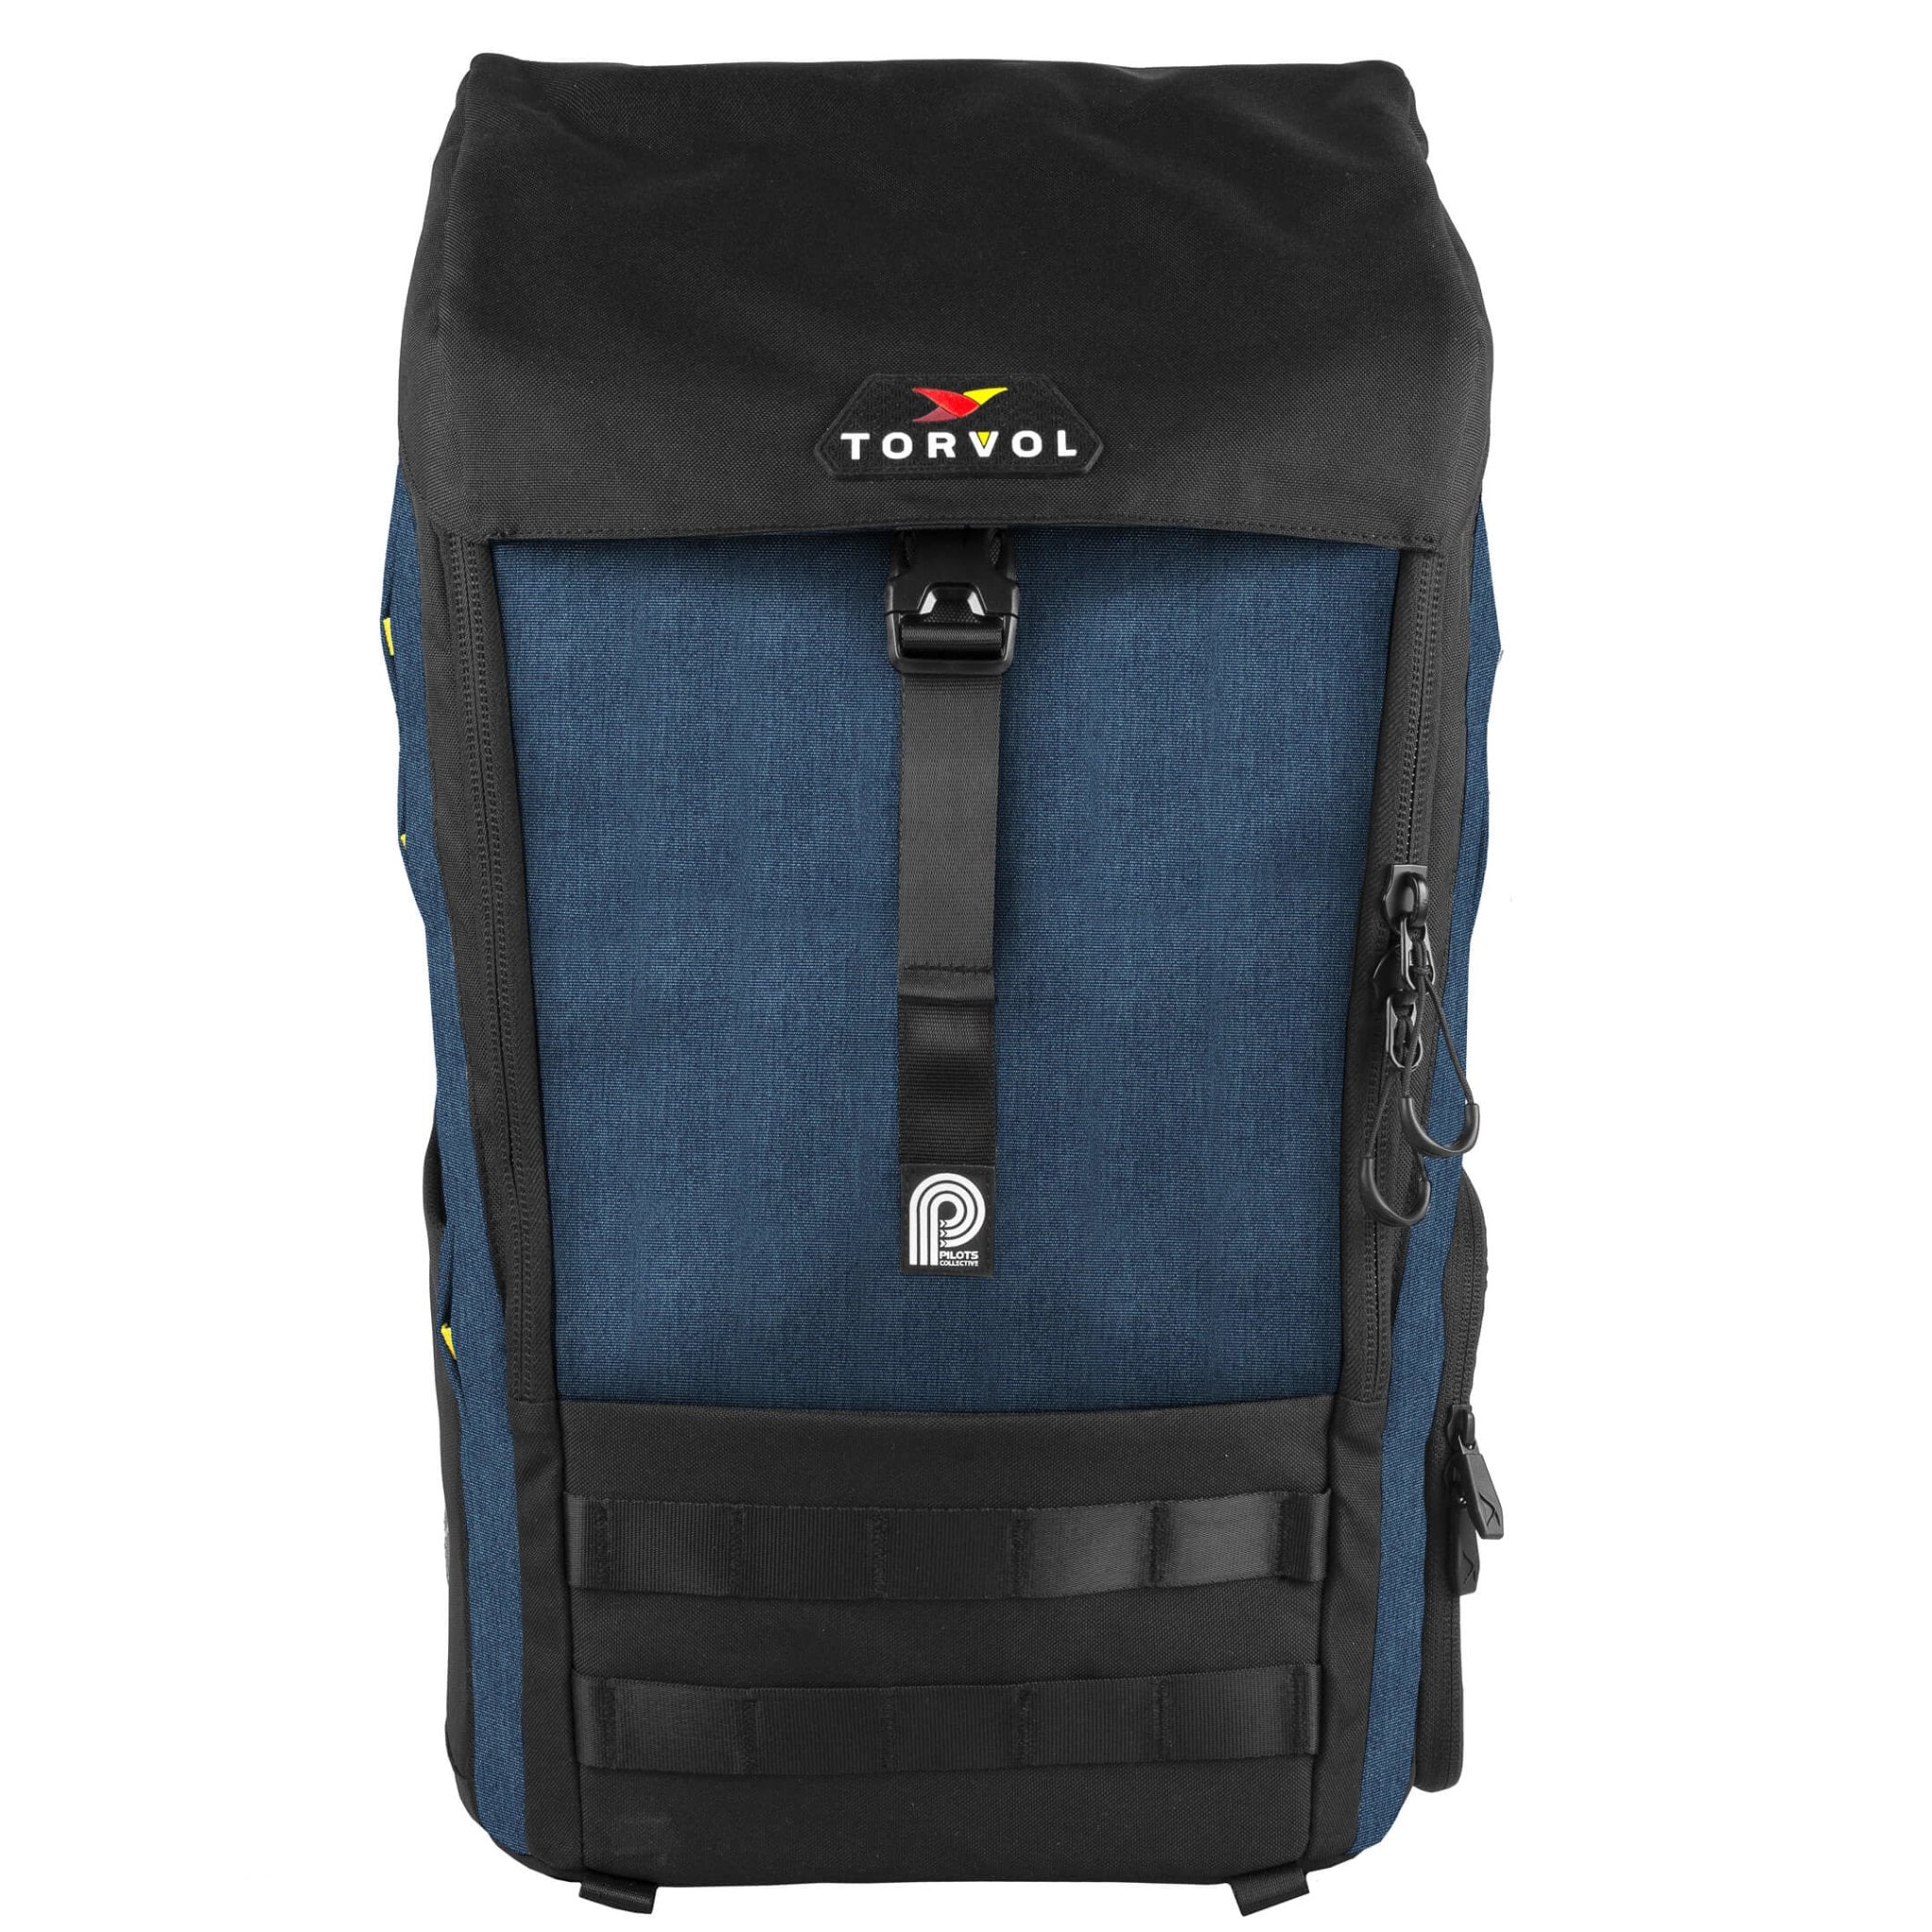 Torvol Urban Carrier Backpack - Your All-Round Freestyle Backpack 10 - Torvol - Drone Authority